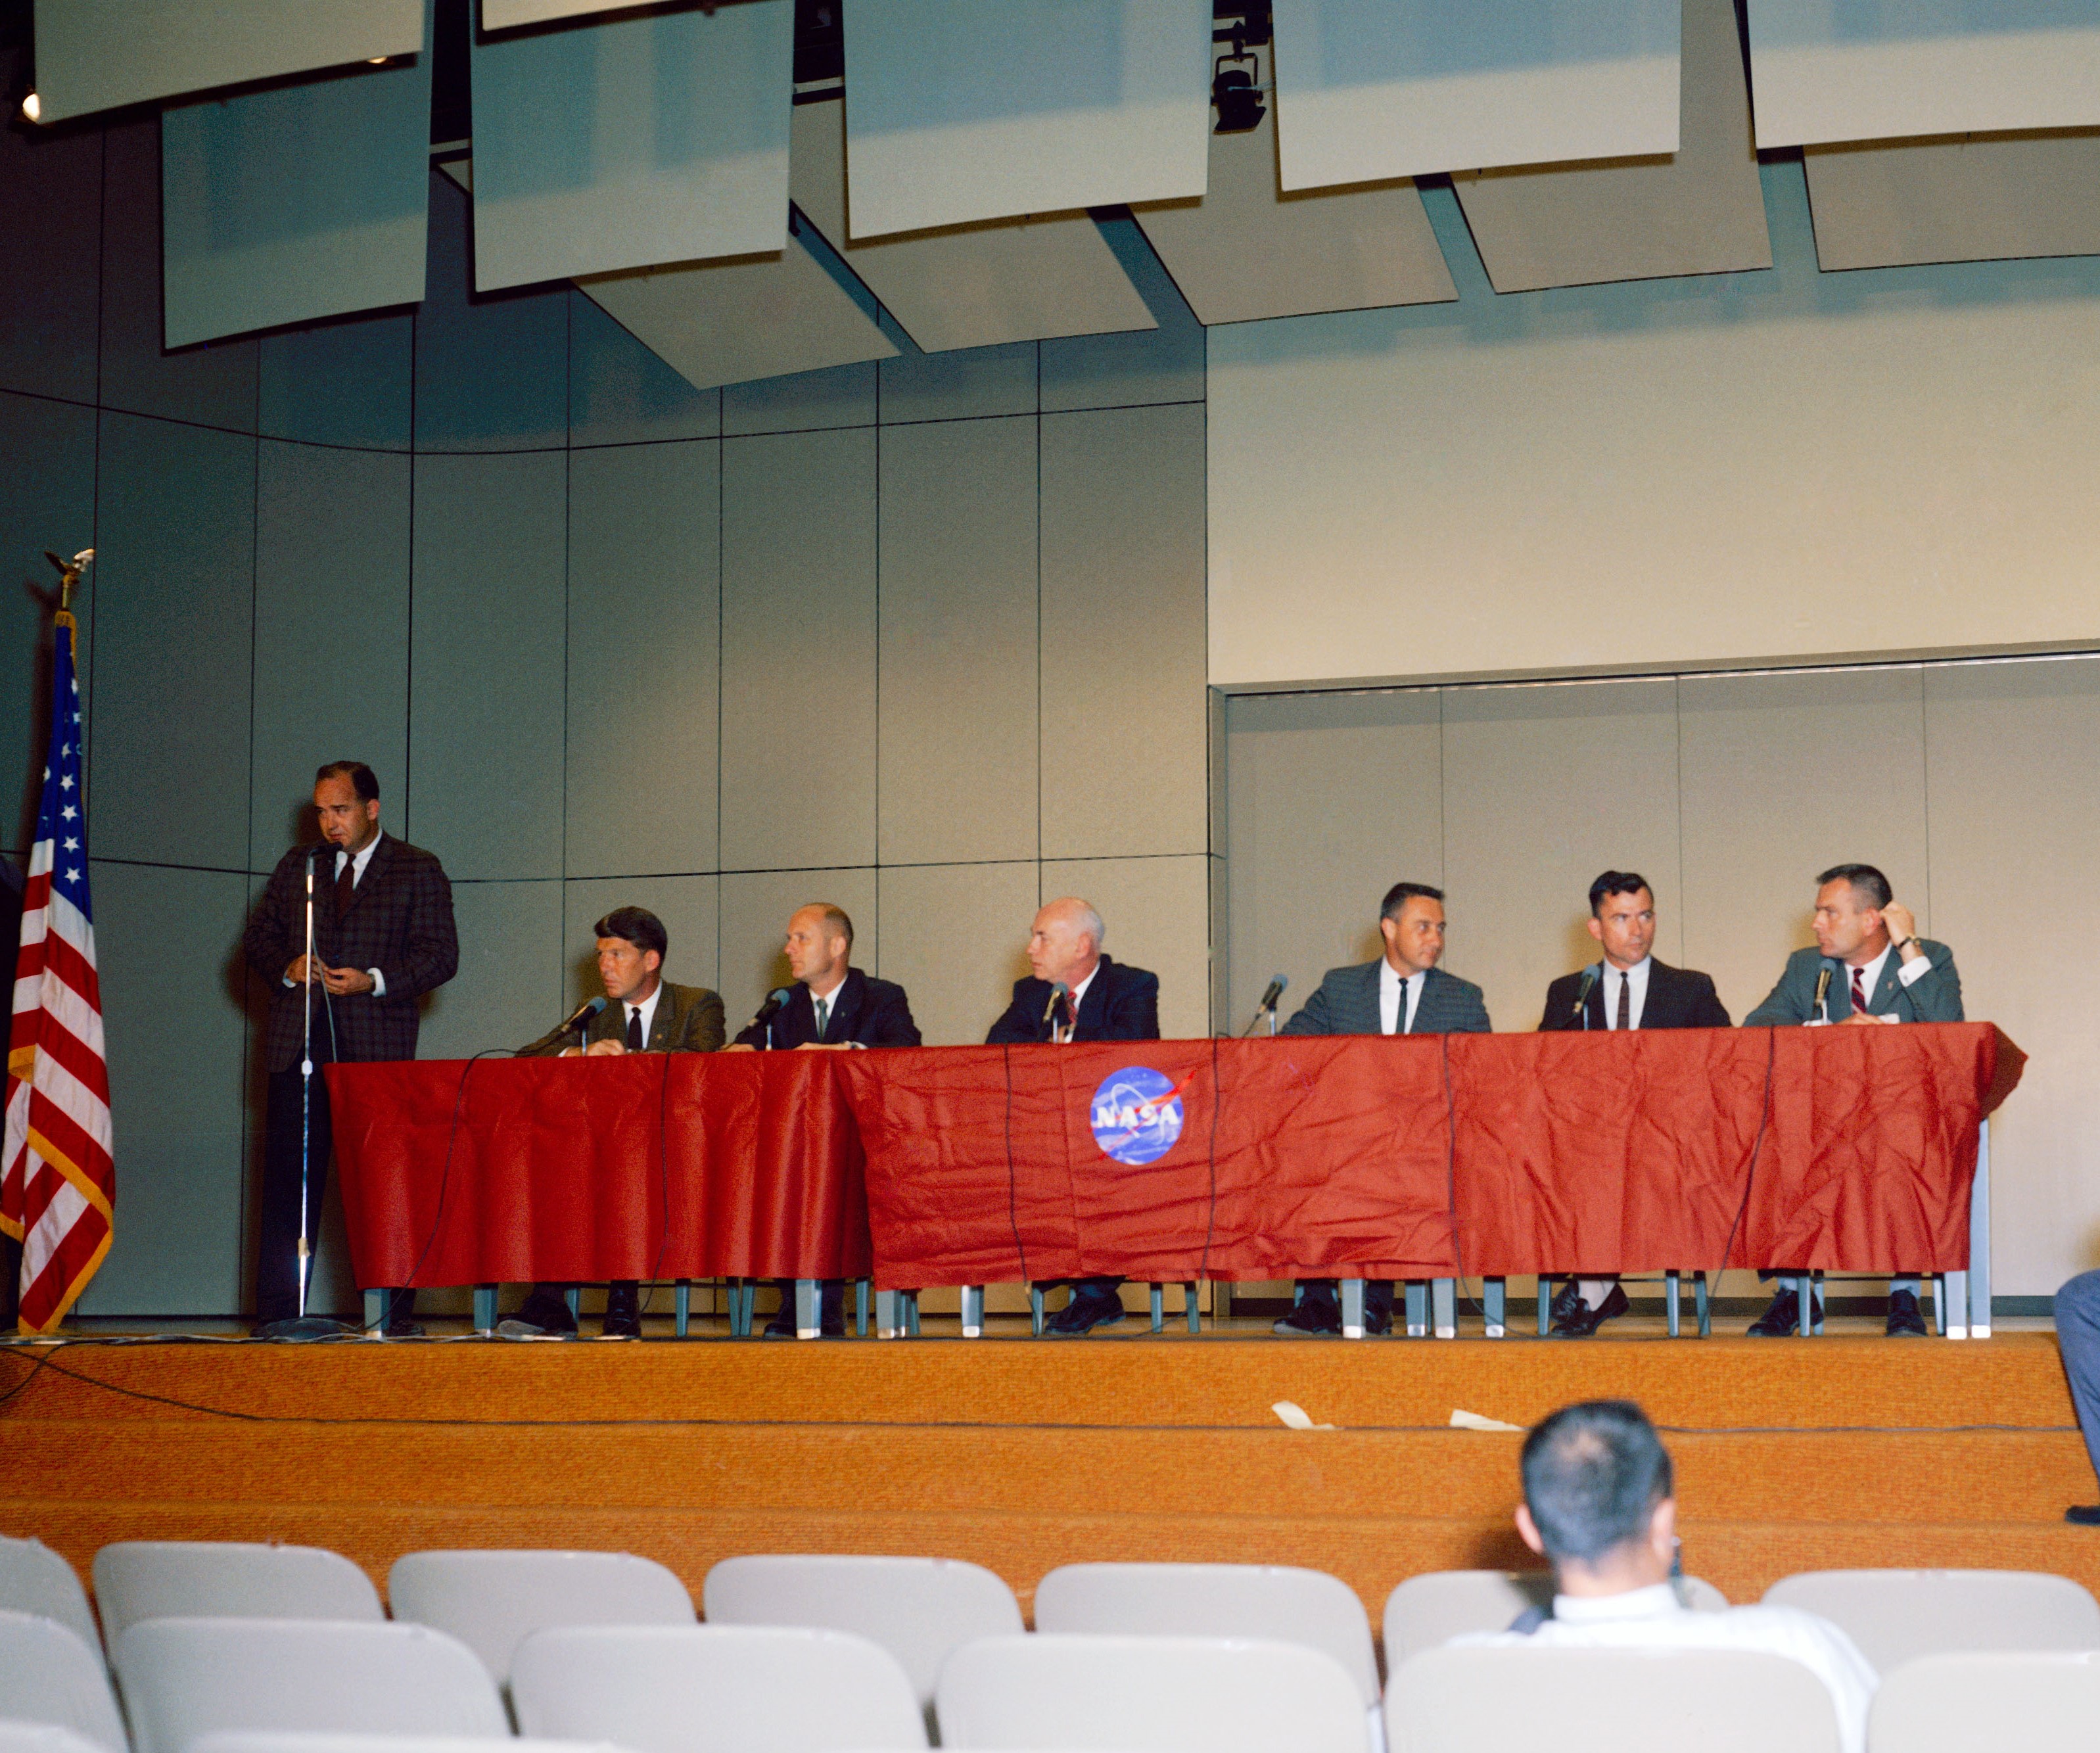 In the auditorium of the Manned Spacecraft Center (MSC), now NASA's Johnson Space Center in Houston, MSC Director Robert R. Gilruth introduces the Gemini 3 crew to the press